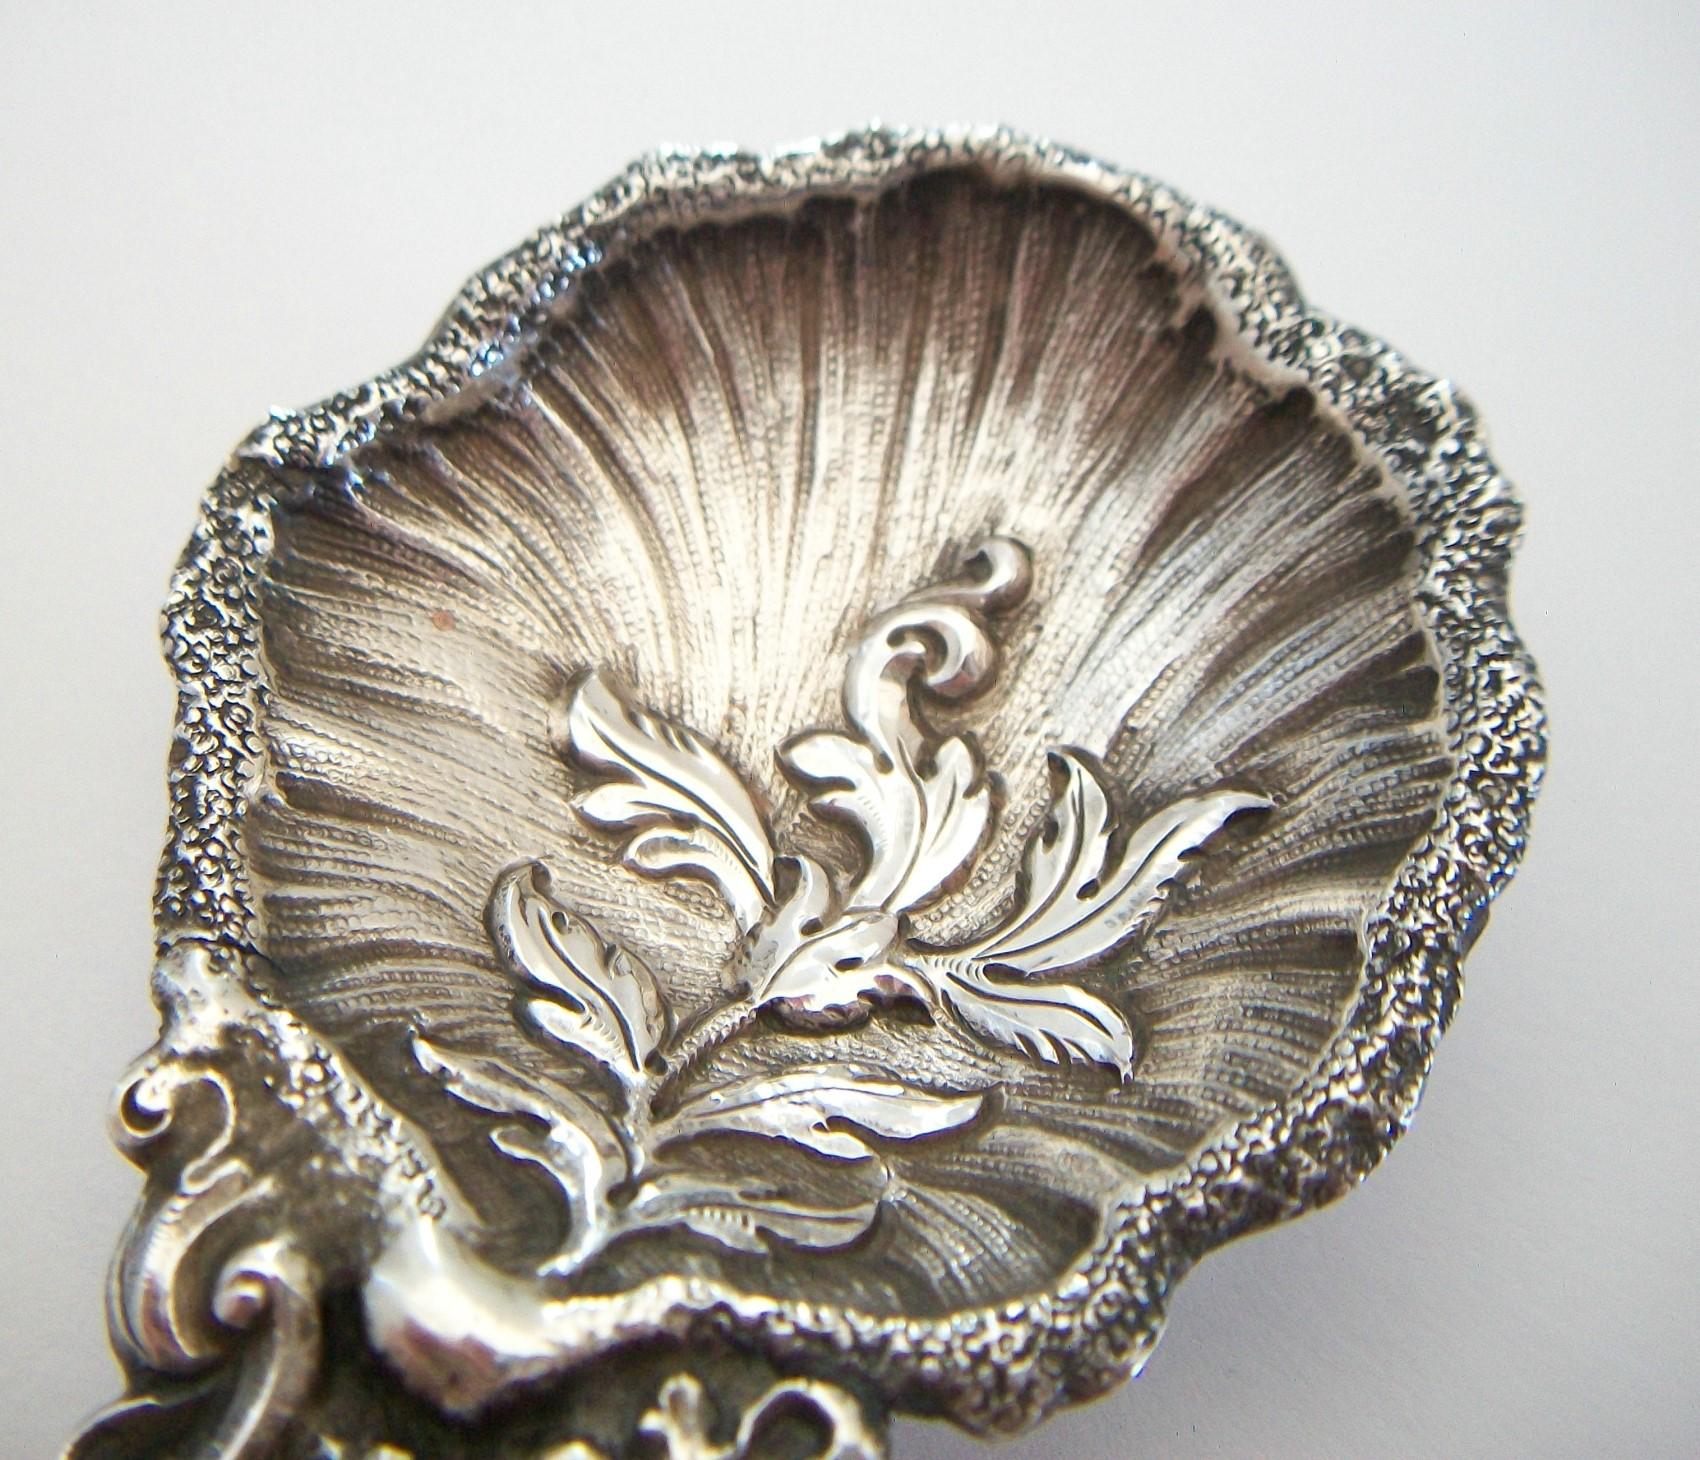 Rococo Style Repousse Silver Plate Tea Caddy Spoon, U.K., Mid-19th Century For Sale 3